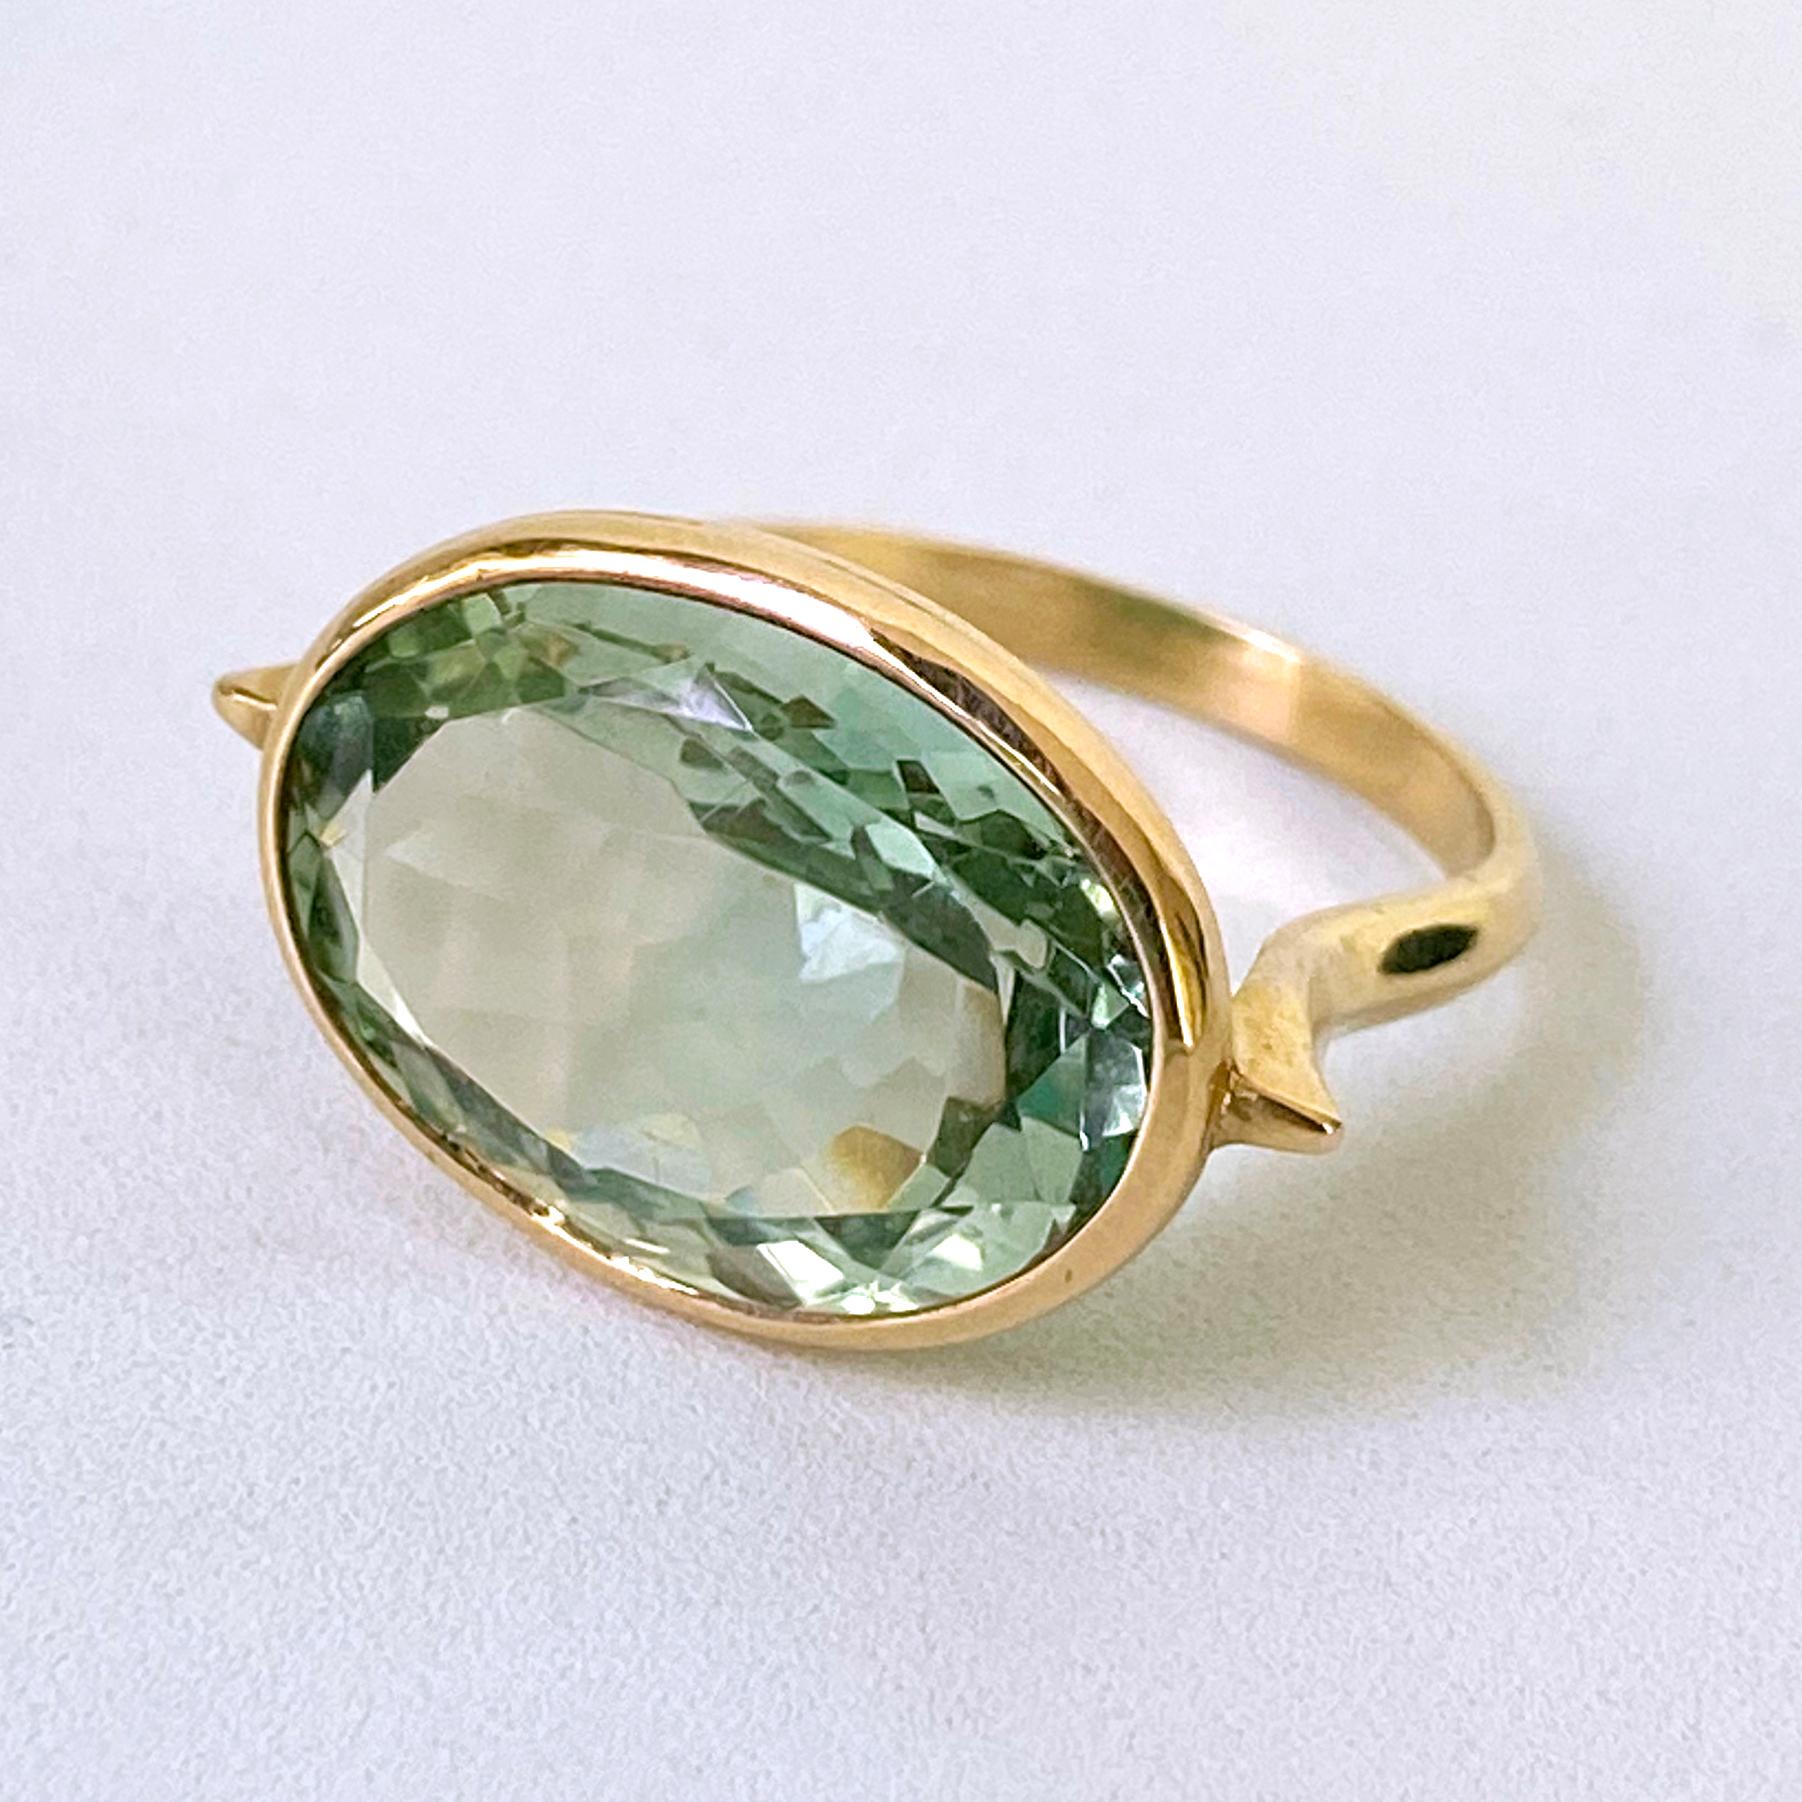 Gorgeous ring featuring a faceted oval 11c Green Amethyst stone - bezel set in 3 grams of solid 14k Yellow Gold. Ring interior is stamped 14k and is sized at 7.5 women's. Beautiful piece that flashes soft hues of Greens due to its perfect